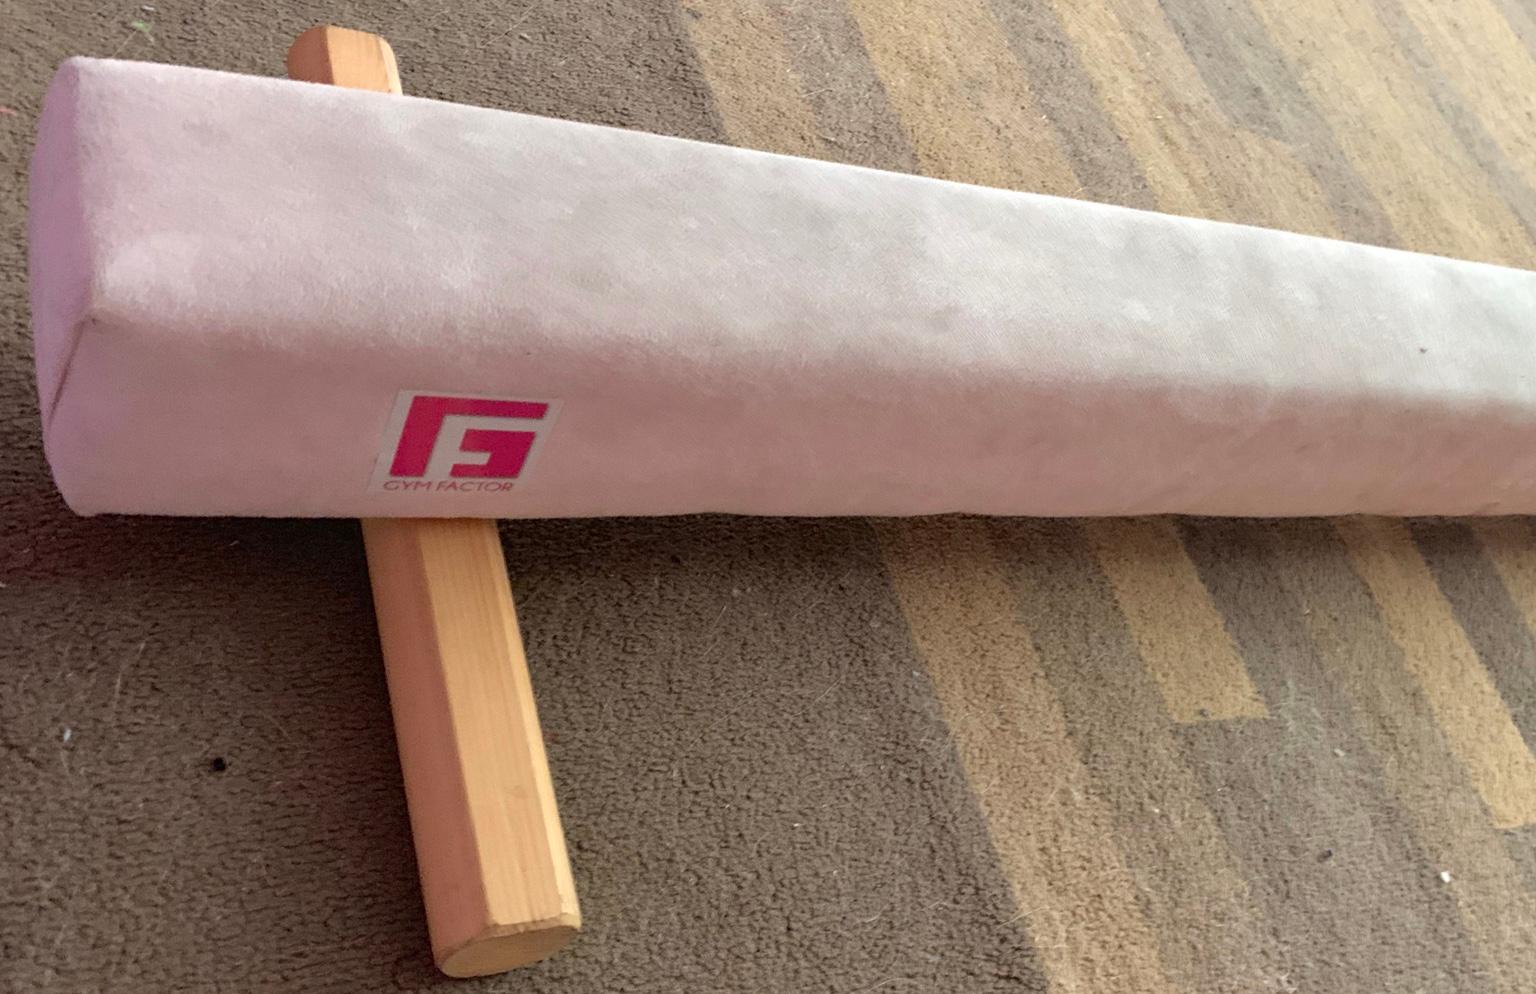 Gymnastics Balance Beam In Bb8 Pendle For 50 00 For Sale Shpock